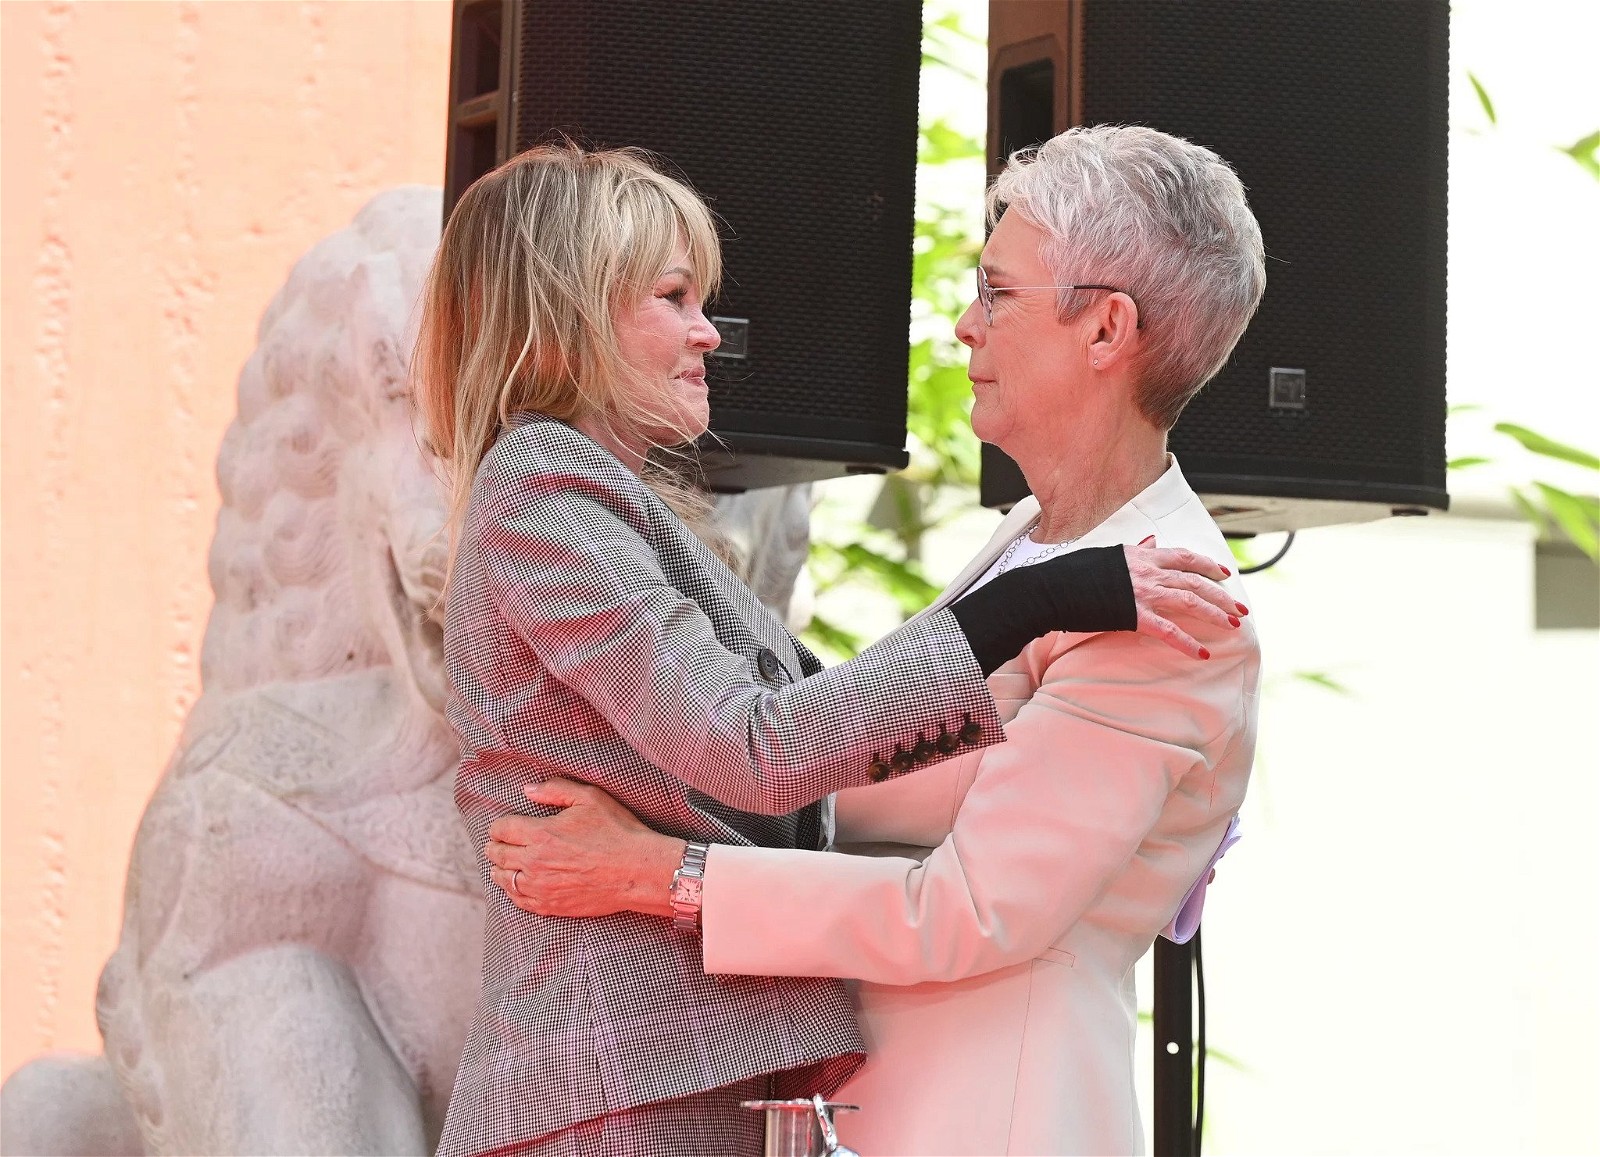 Jamie Lee Curtis and Melanie Griffith at Hand and Foot ceremony